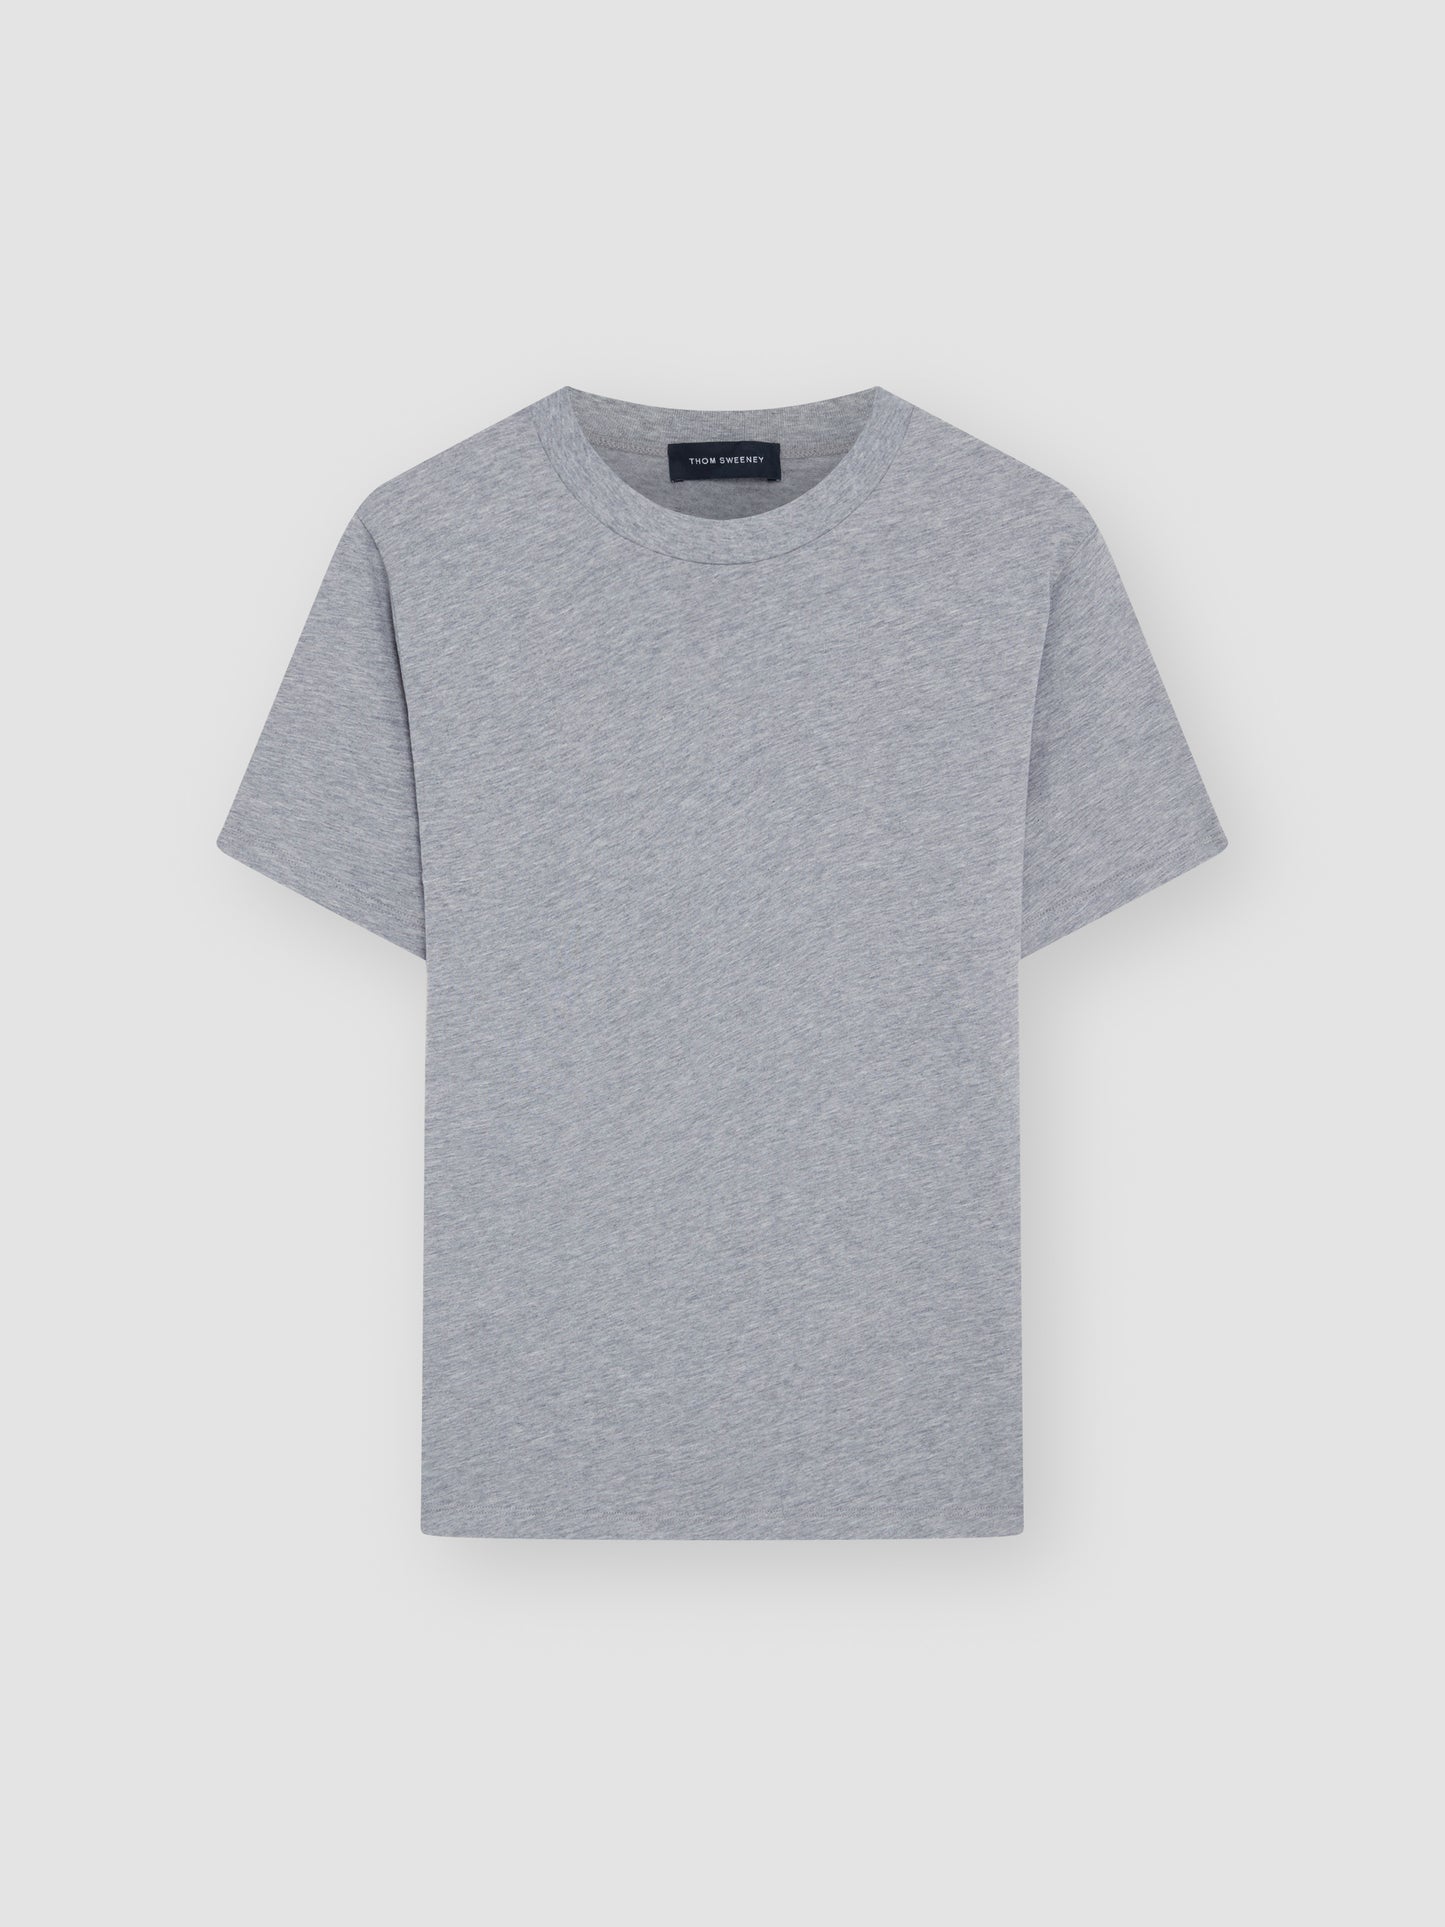 Cotton Wide Collar Classic T-Shirt Grey Product Image